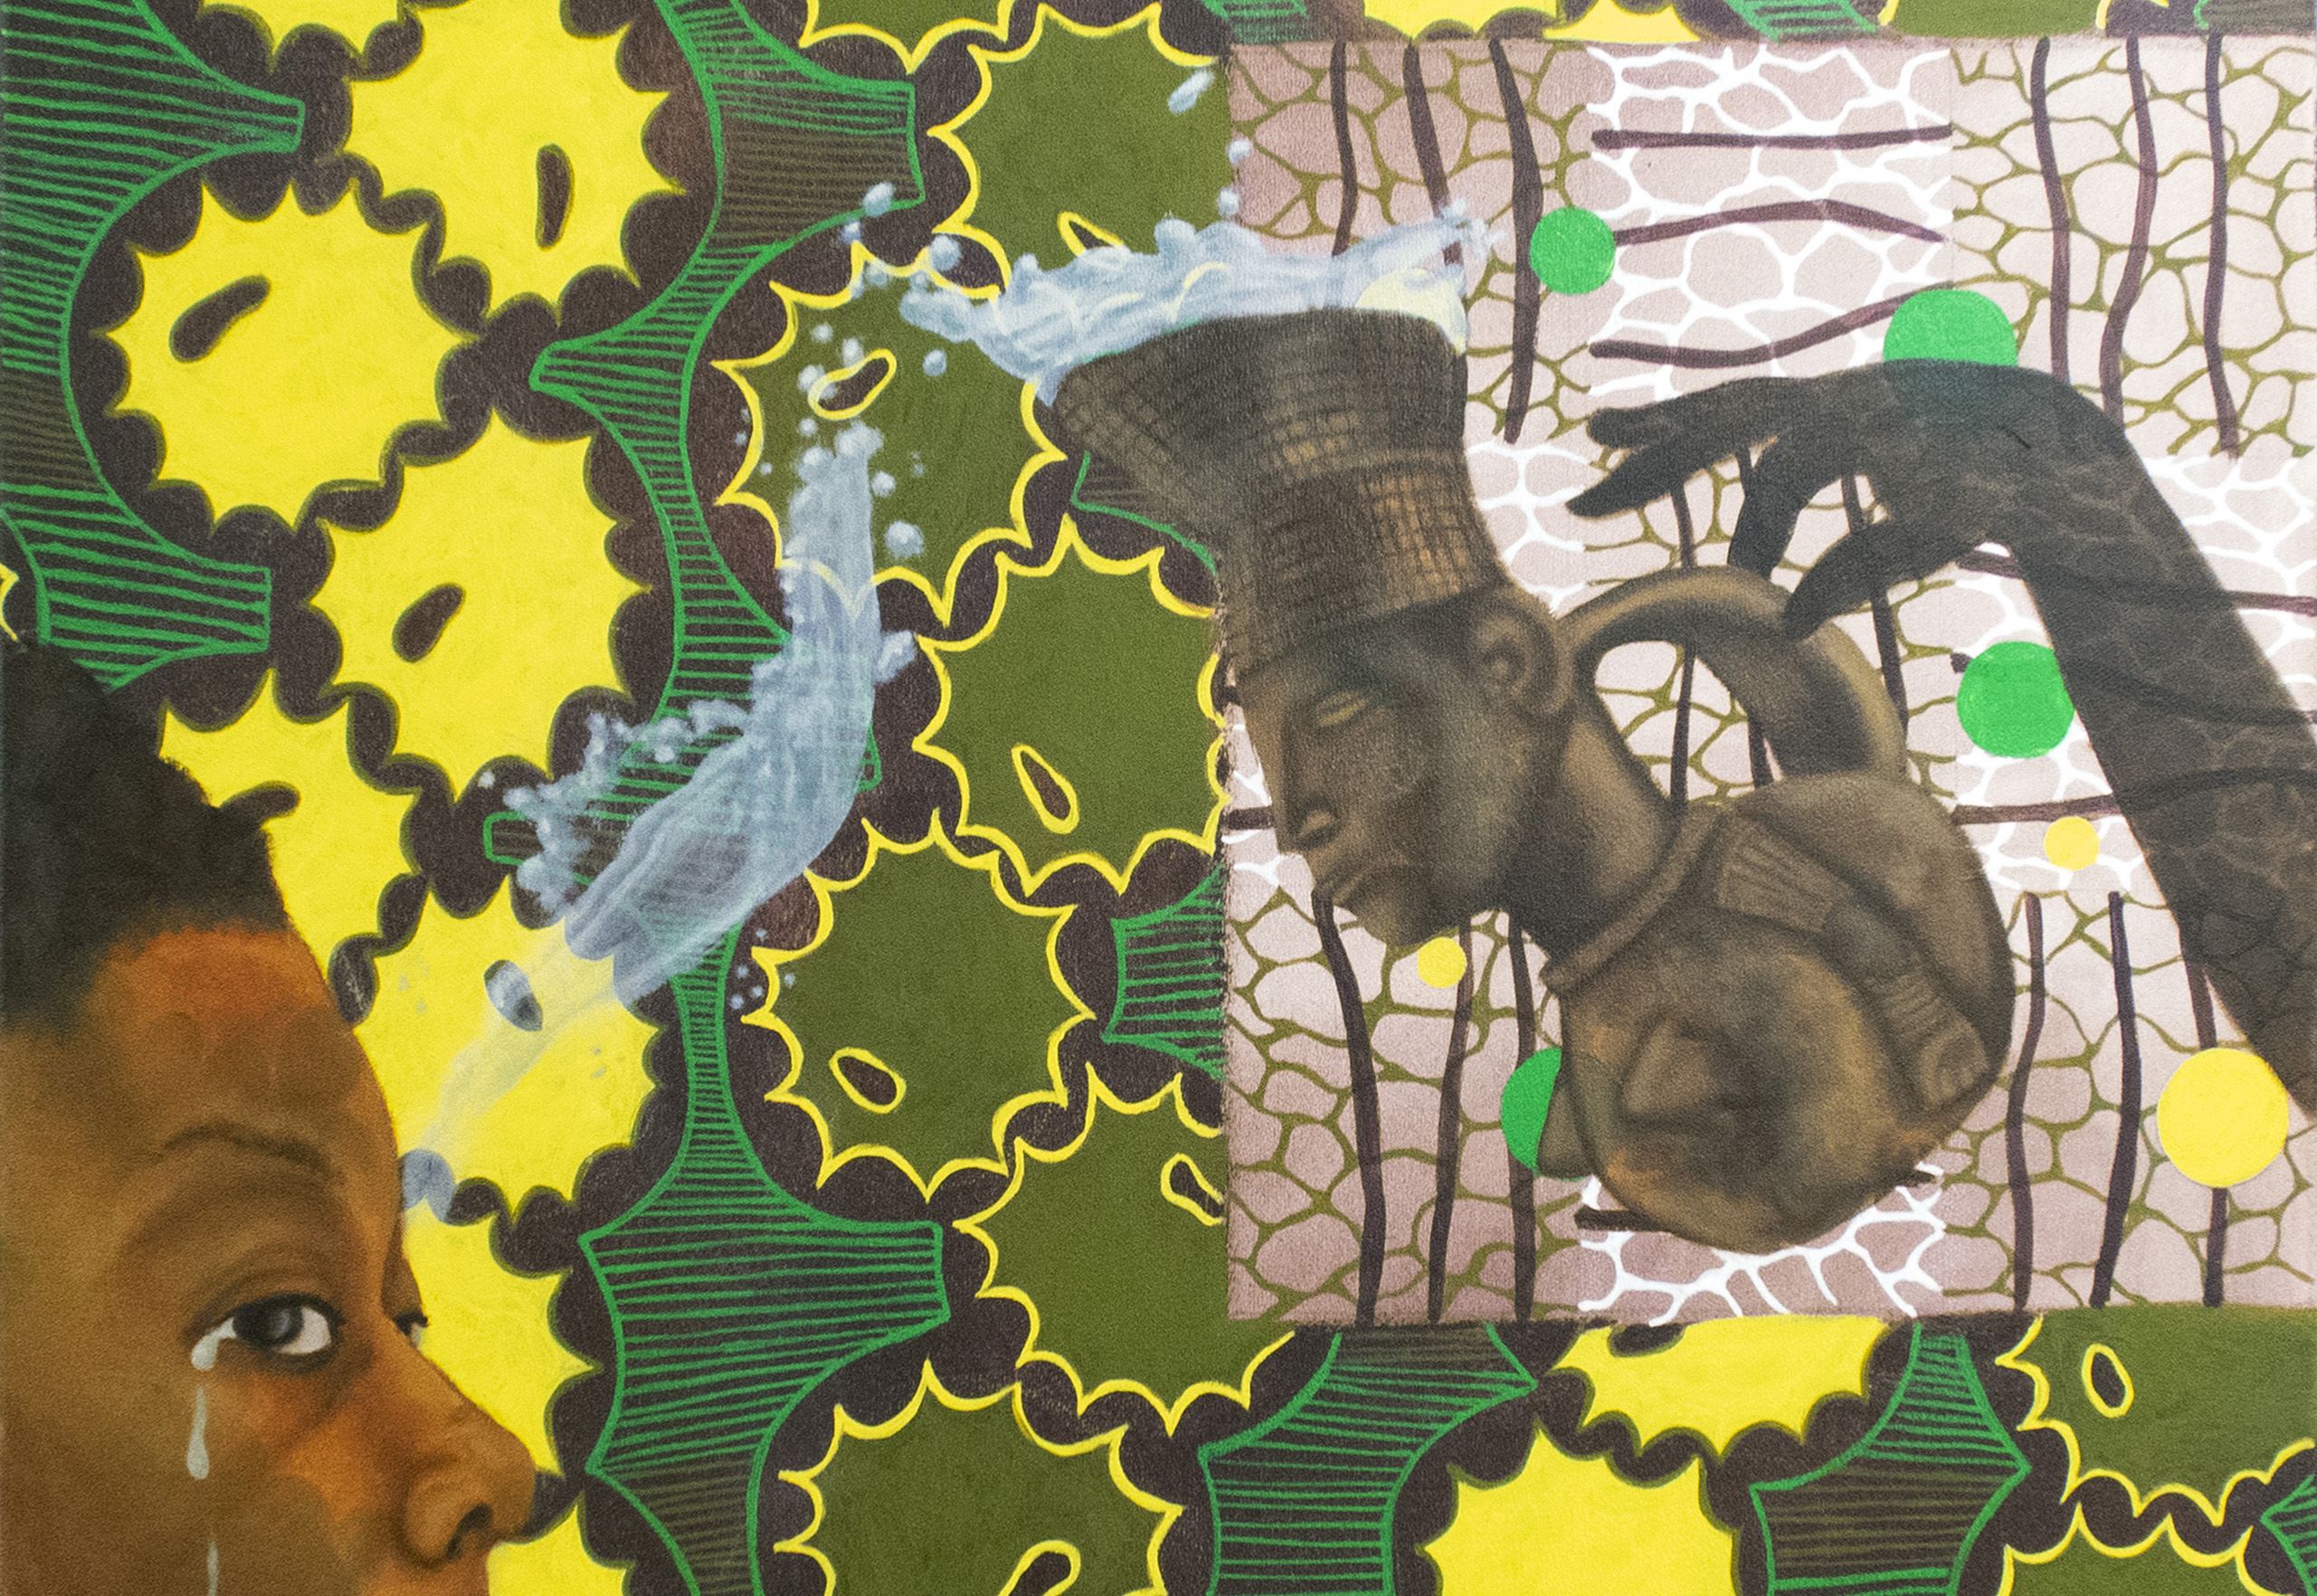 The background is an African wax fabric print in yellow, green, brown and white. To the right is a Mangbetu water vessel with a silhouetted hand pouring water onto the face of a black woman, the splashes merge into their tears.